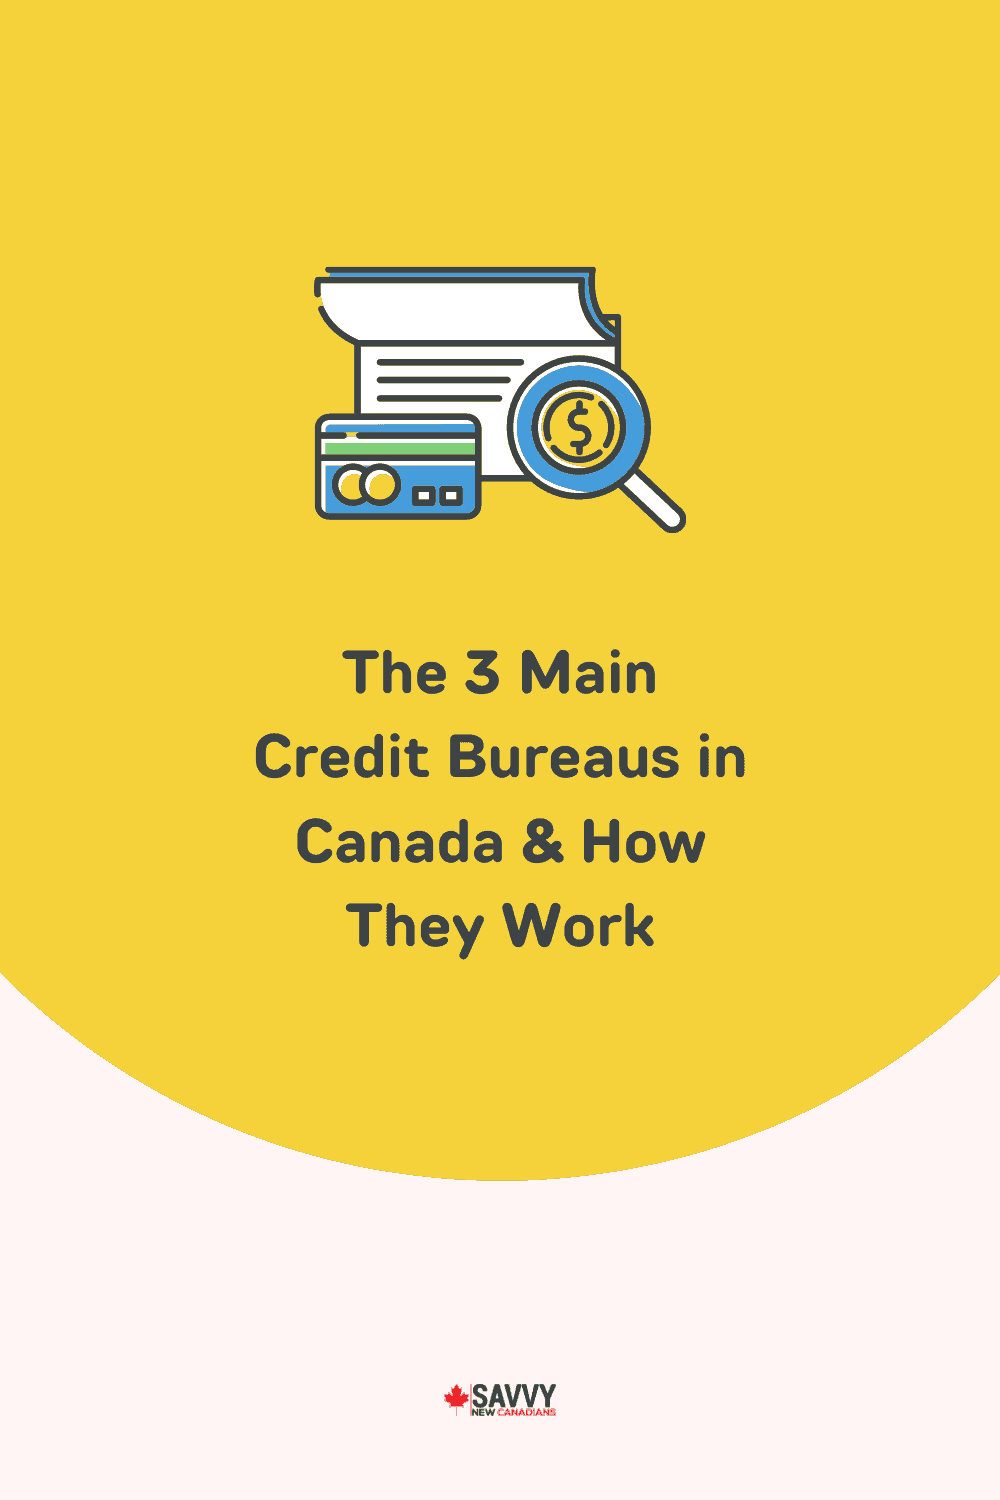 The 3 Main Credit Bureaus in Canada & How They Work